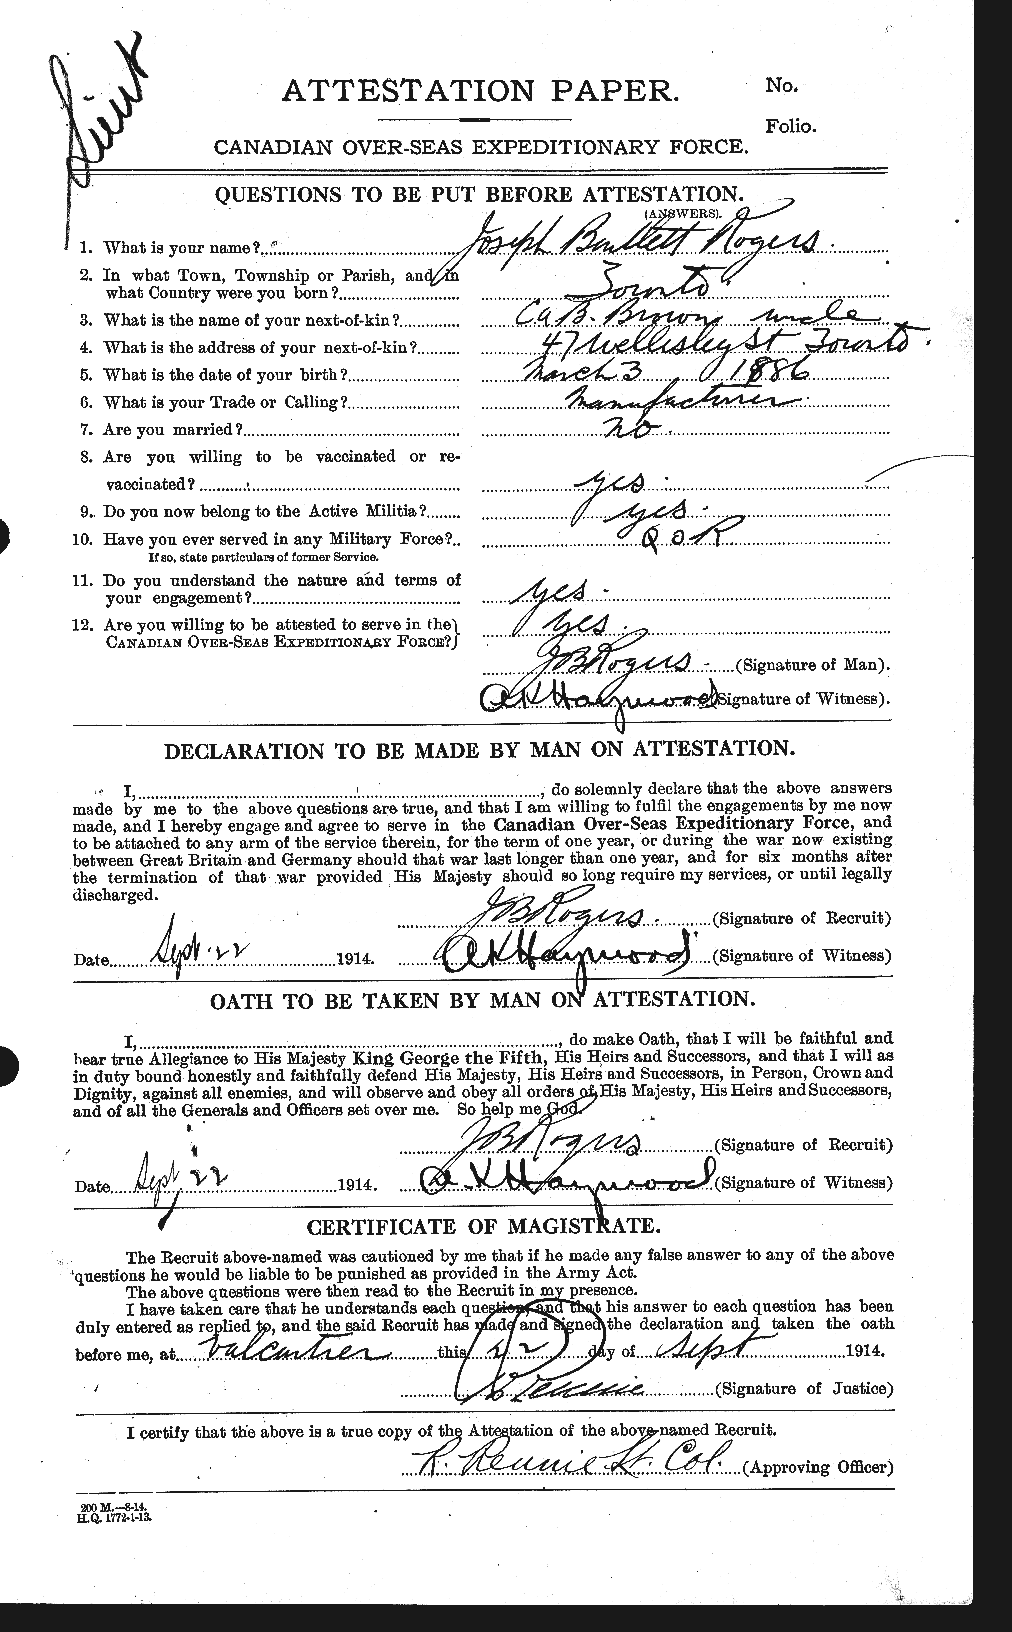 Personnel Records of the First World War - CEF 610020a